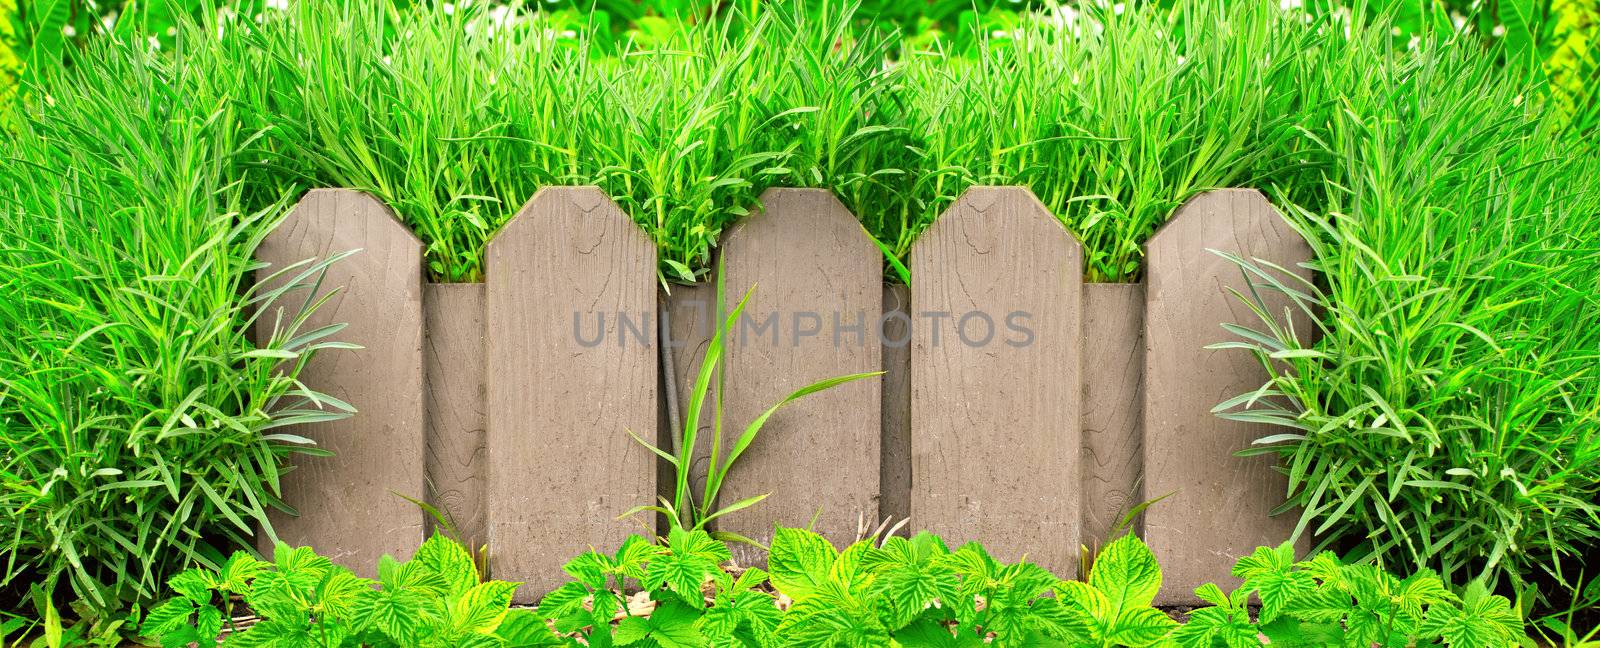 Wooden fence and green grass by frenta